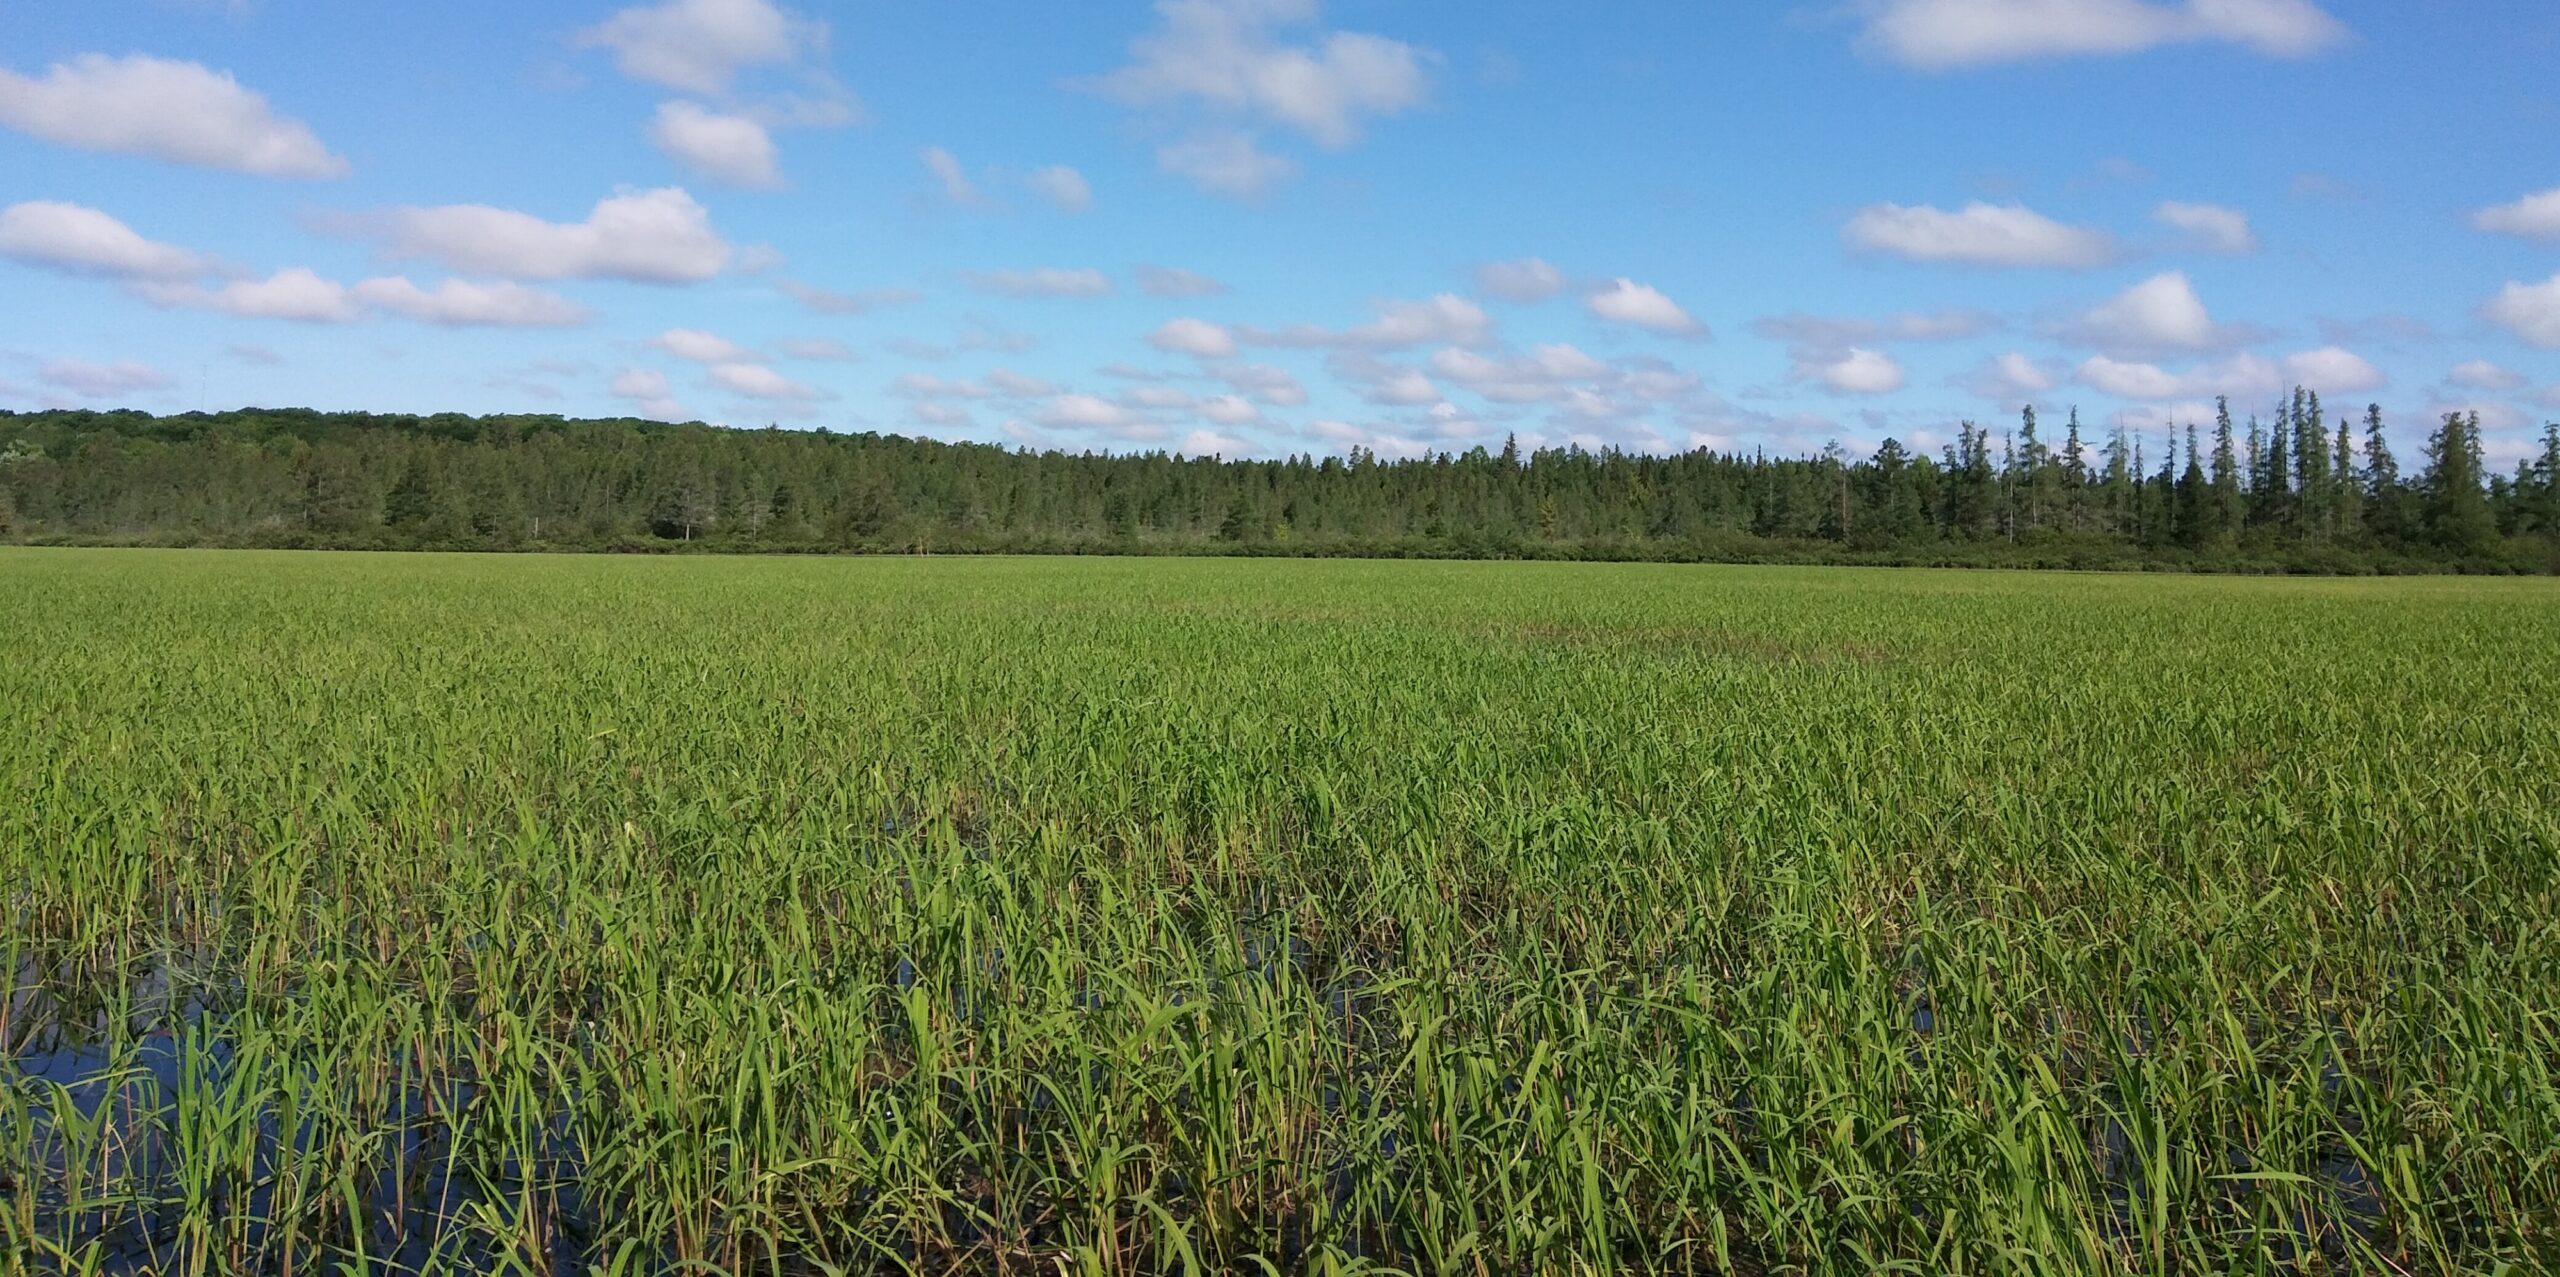 An ‘Indicator Plant’: Wild Rice Struggles To Survive In A Changing Climate